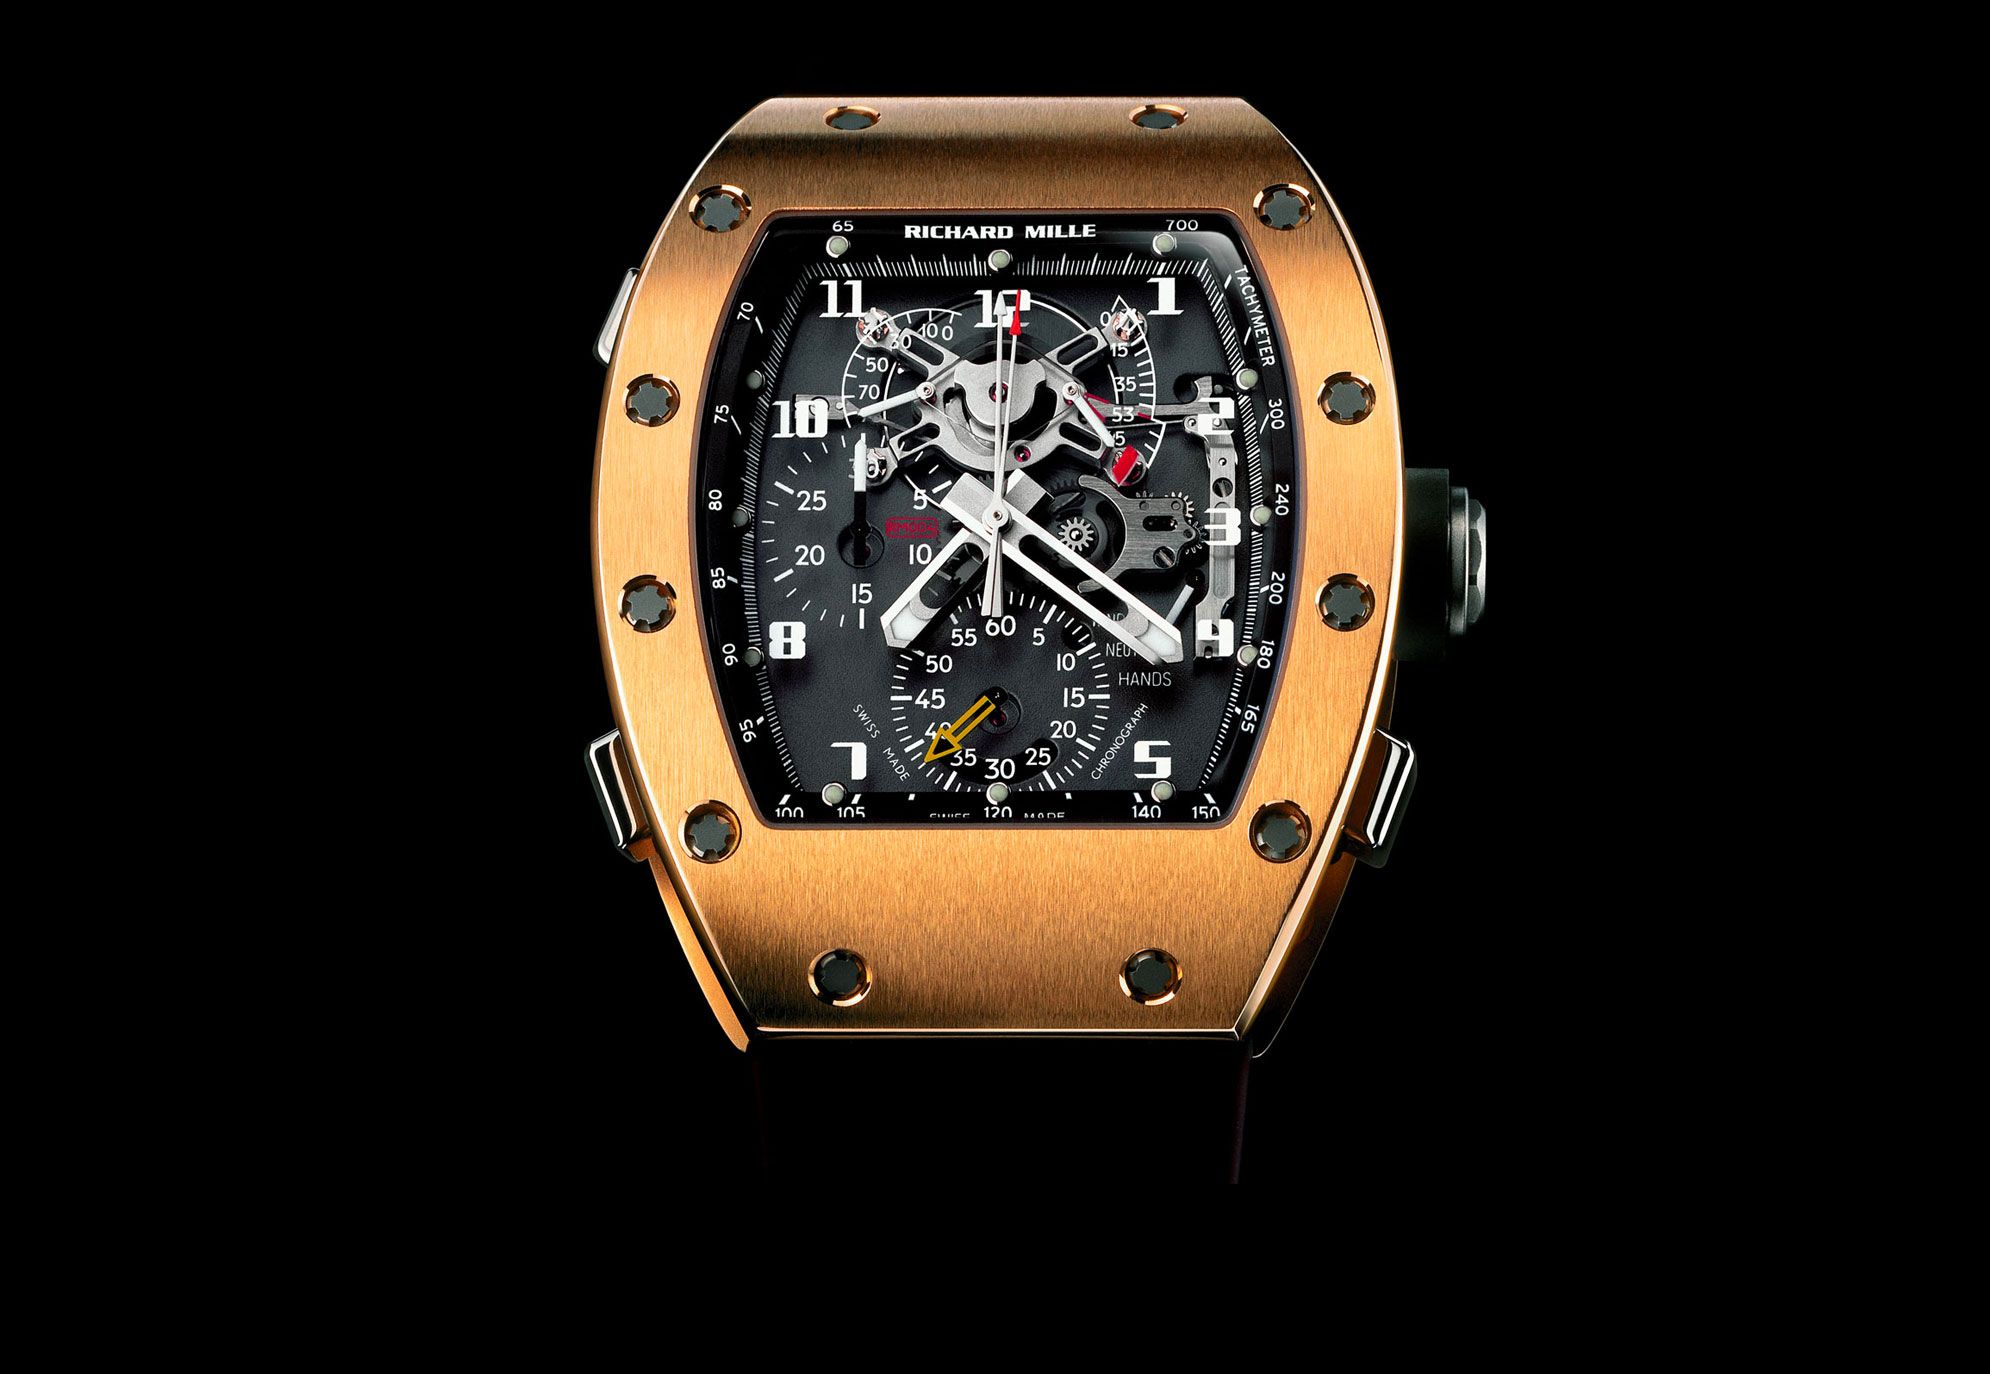 Richard Mille Rm11-02 AO TI Flyback Chronograph Dual Time Zone